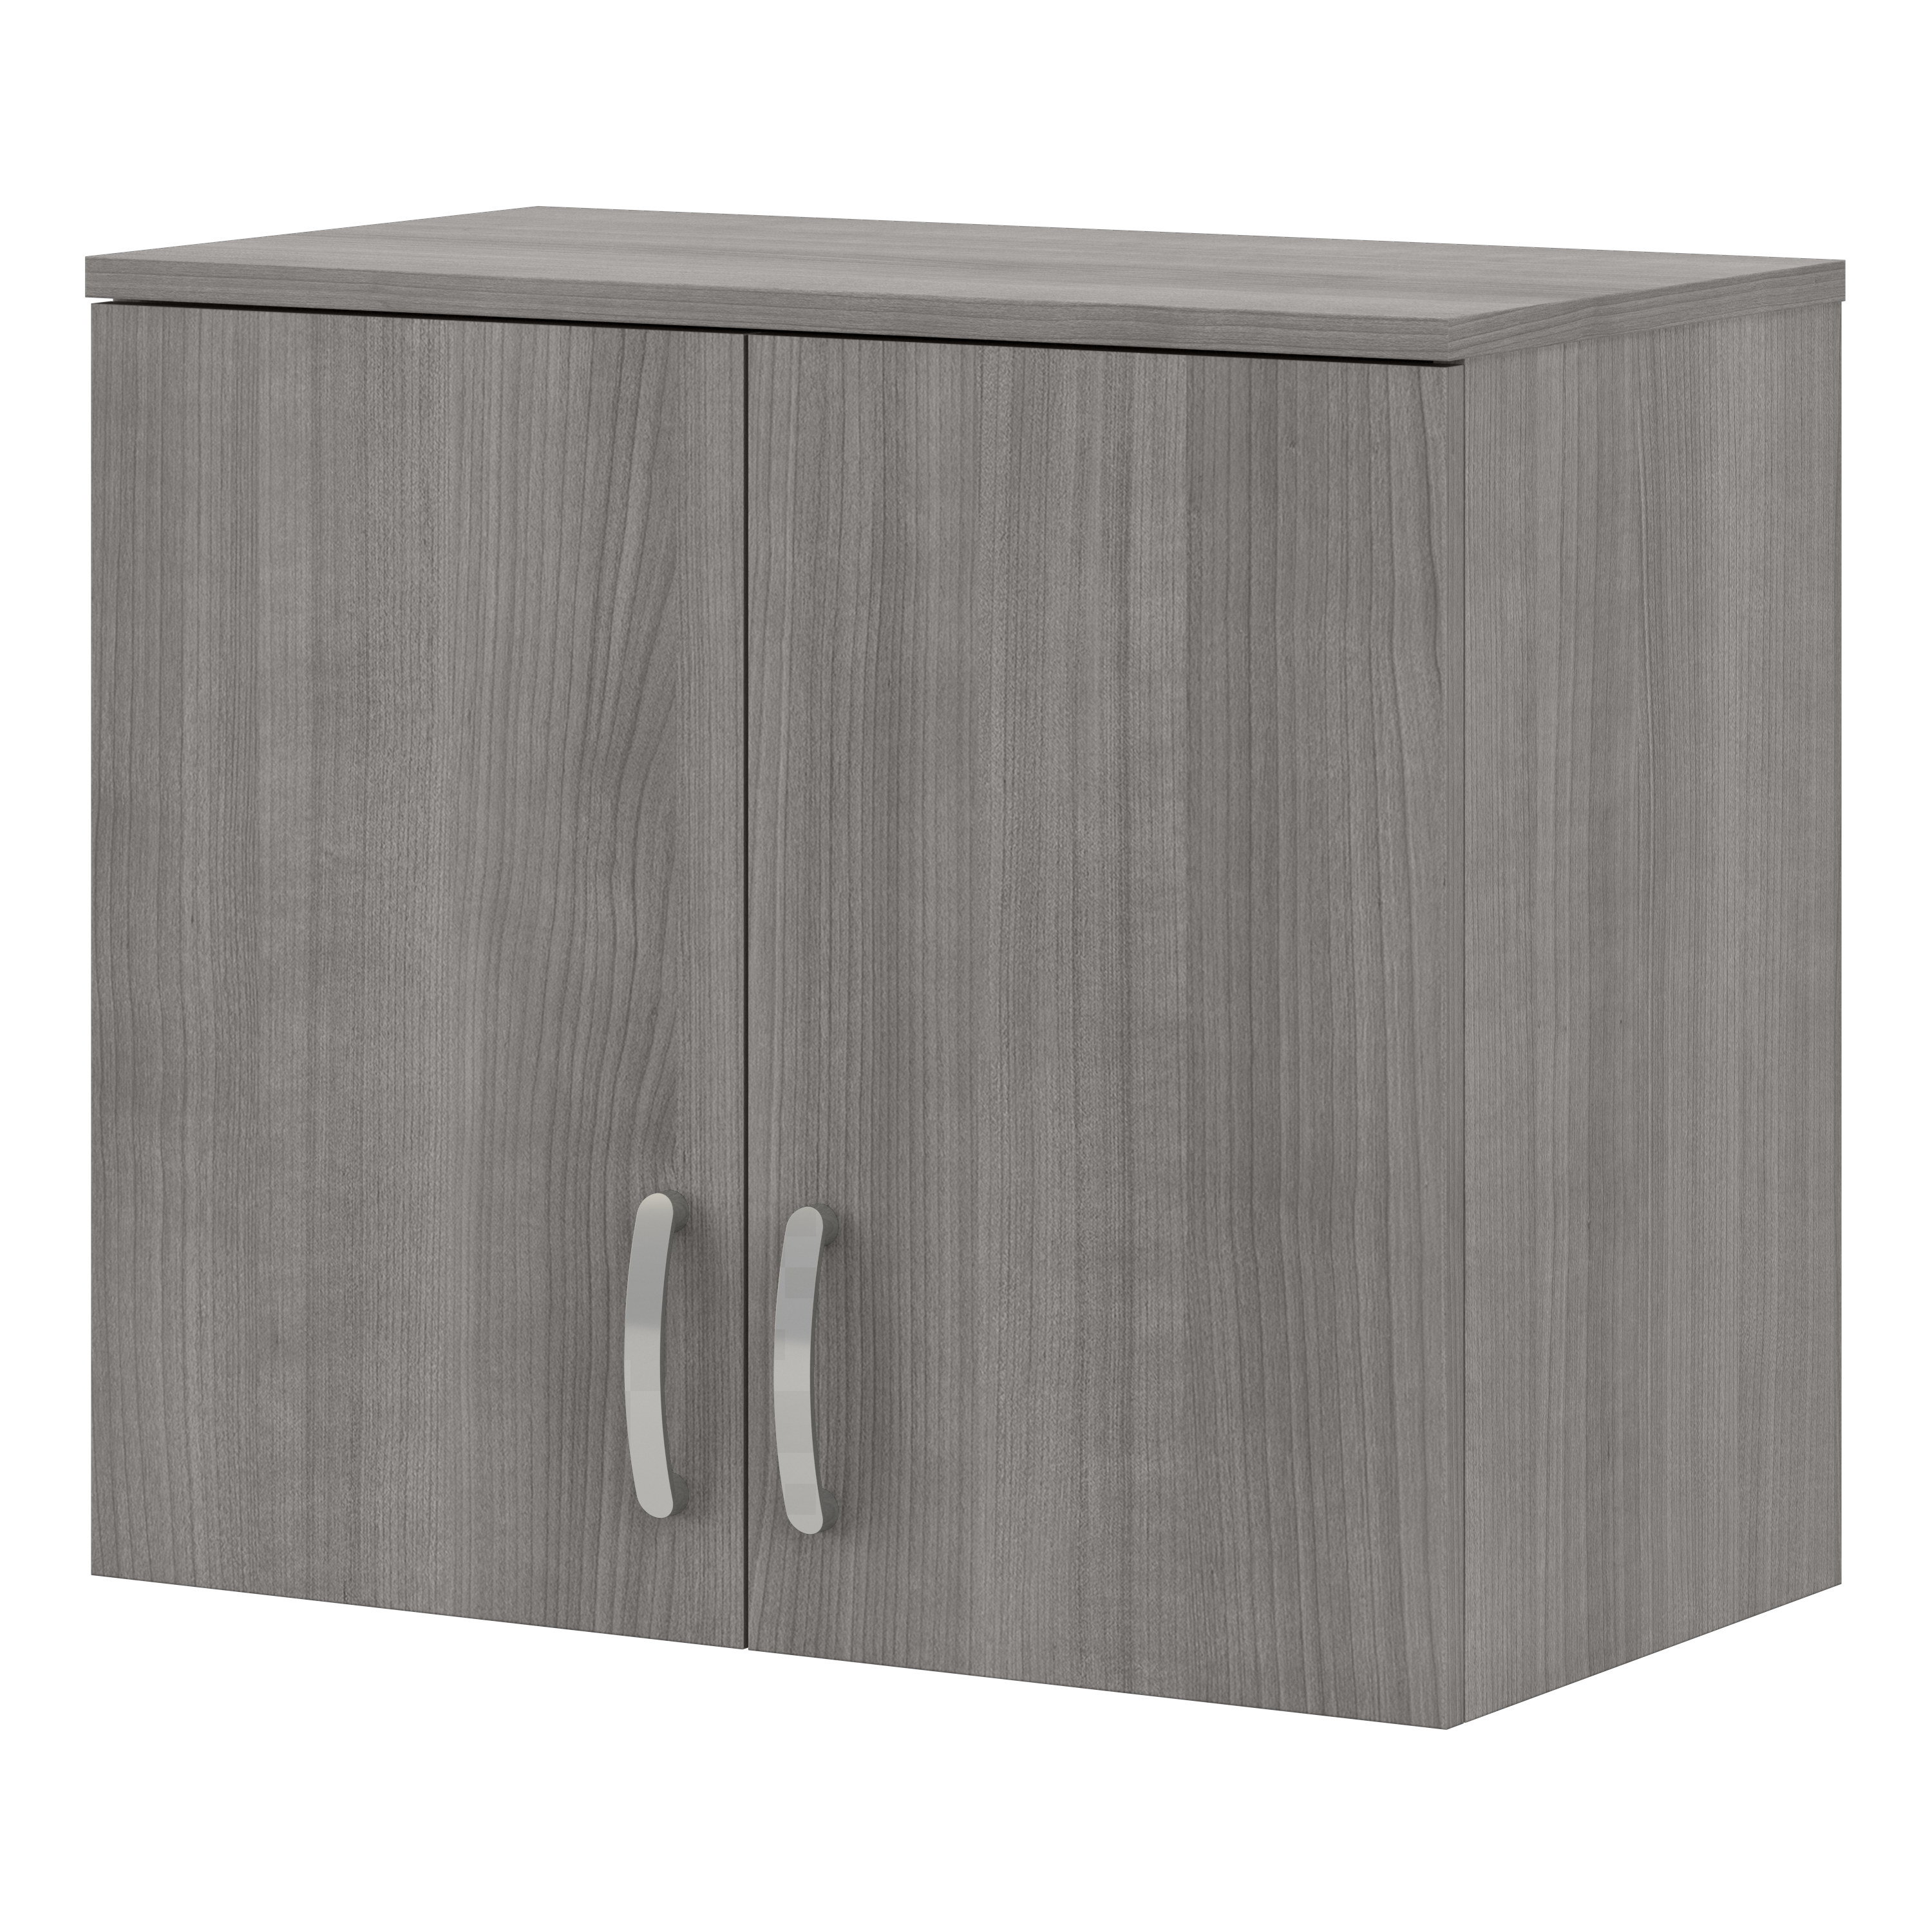 Shop Bush Business Furniture Universal Wall Cabinet with Doors and Shelves 02 UNS428PG #color_platinum gray